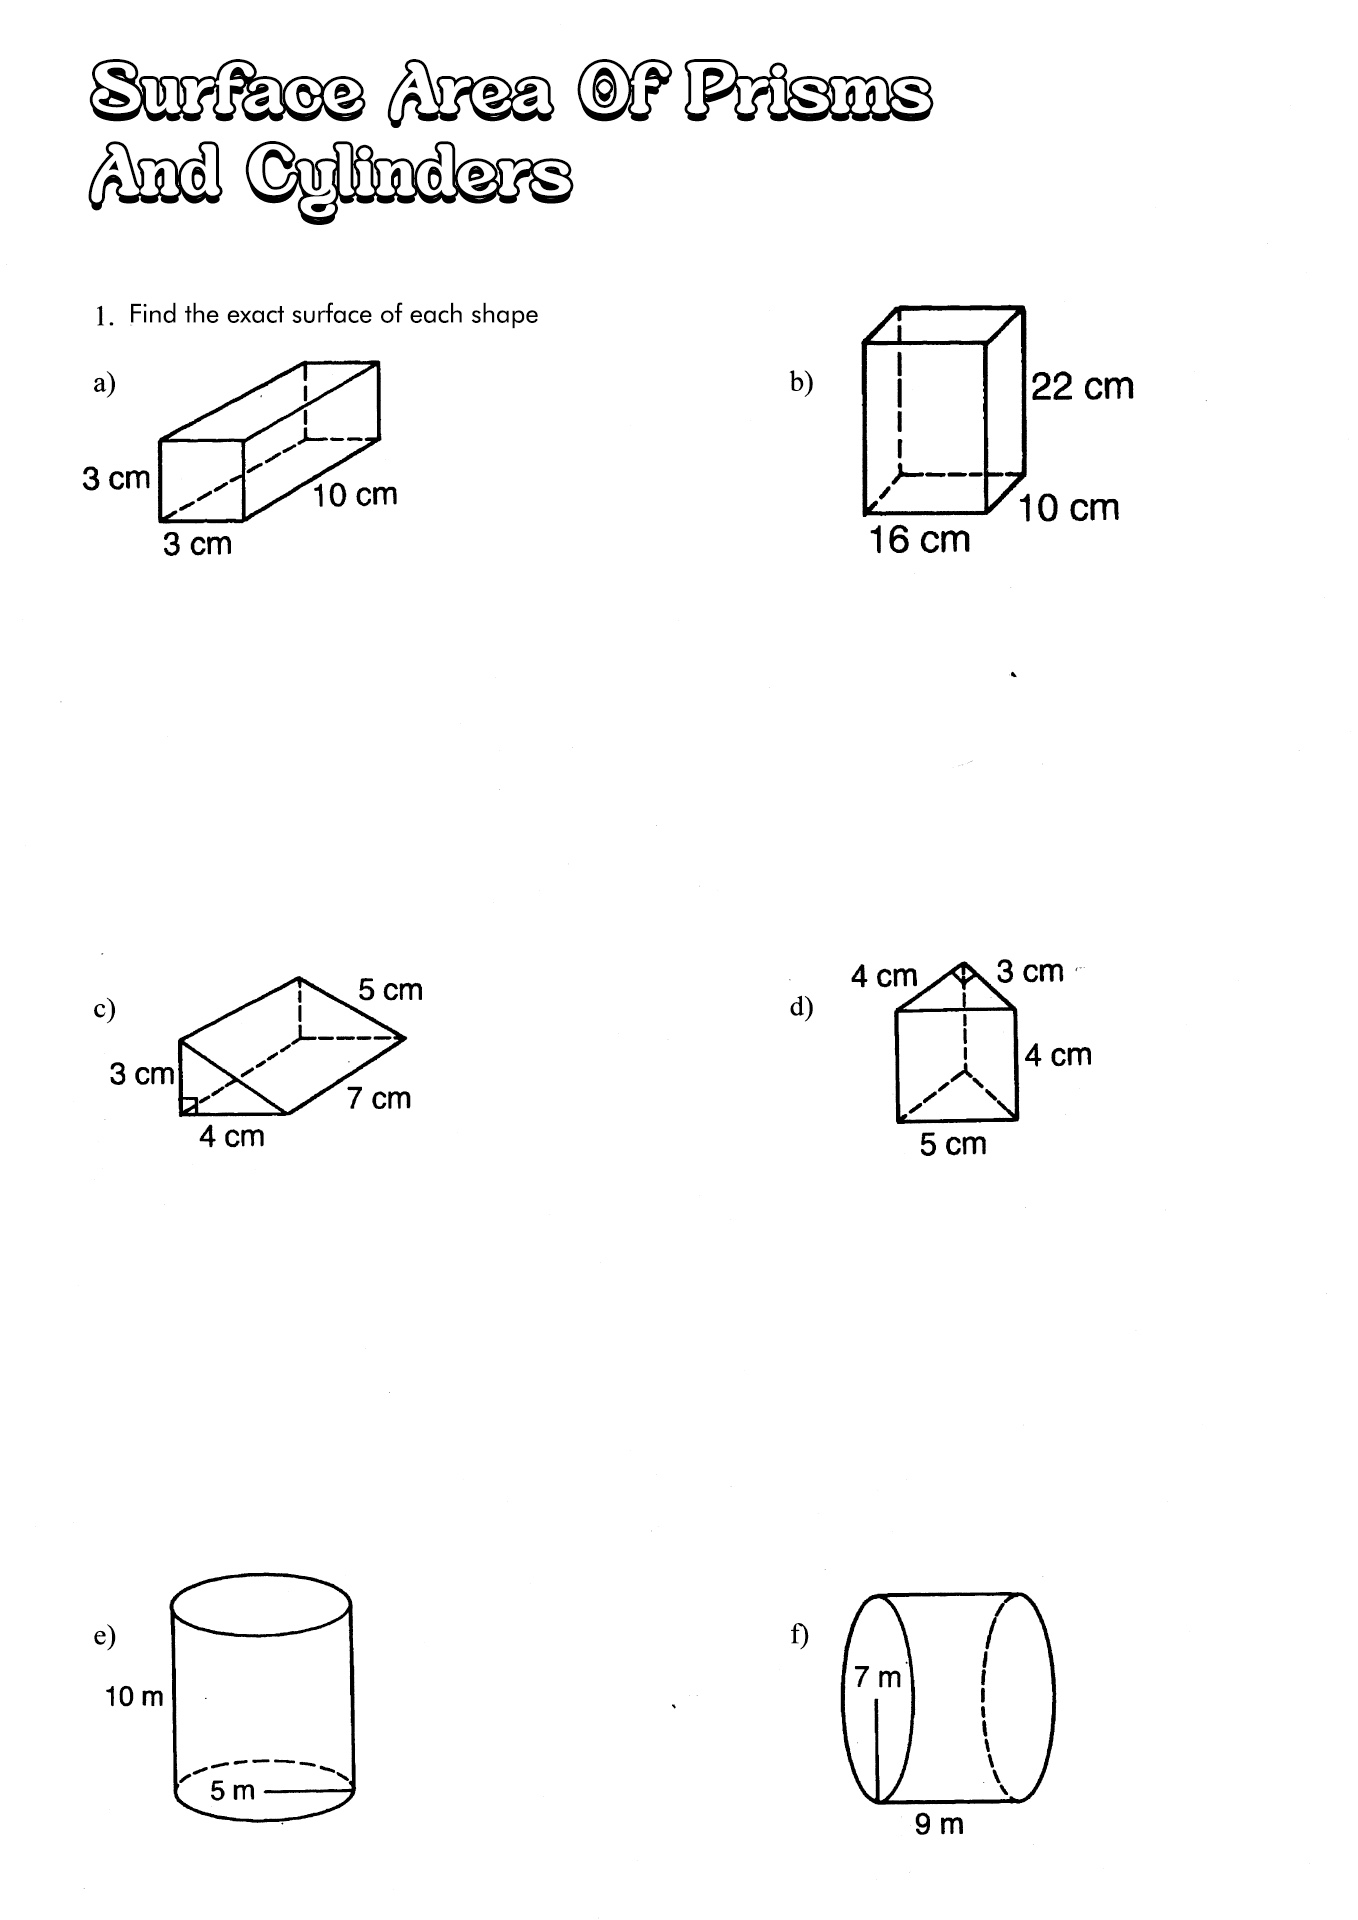 Surface Area of Prisms and Cylinders Worksheet Image